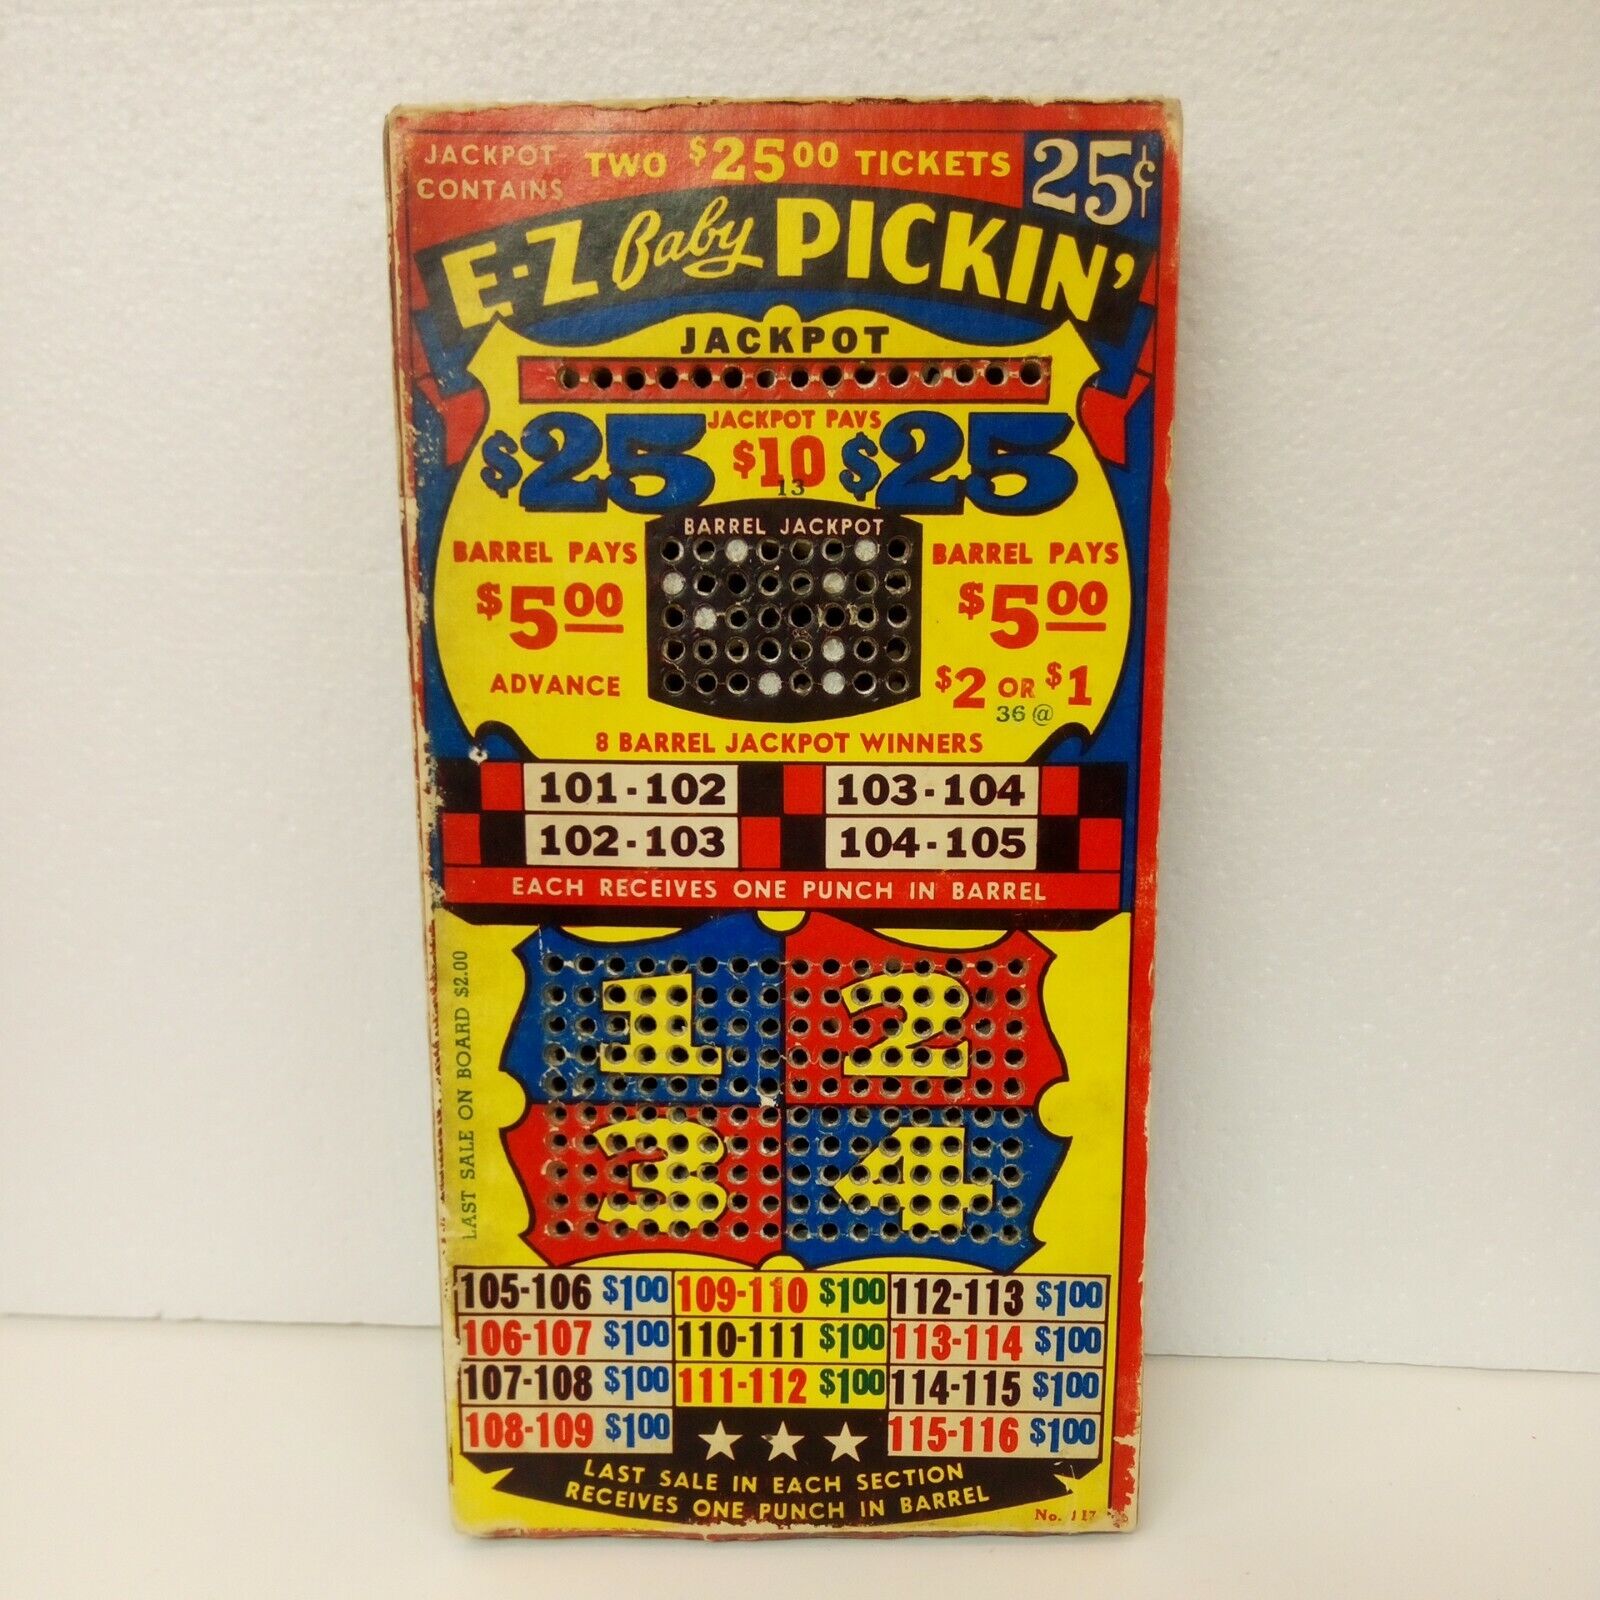 Vintage Punch Board Bar Gambling Game 25 Cent E-Z Baby Picking Some Unpunched